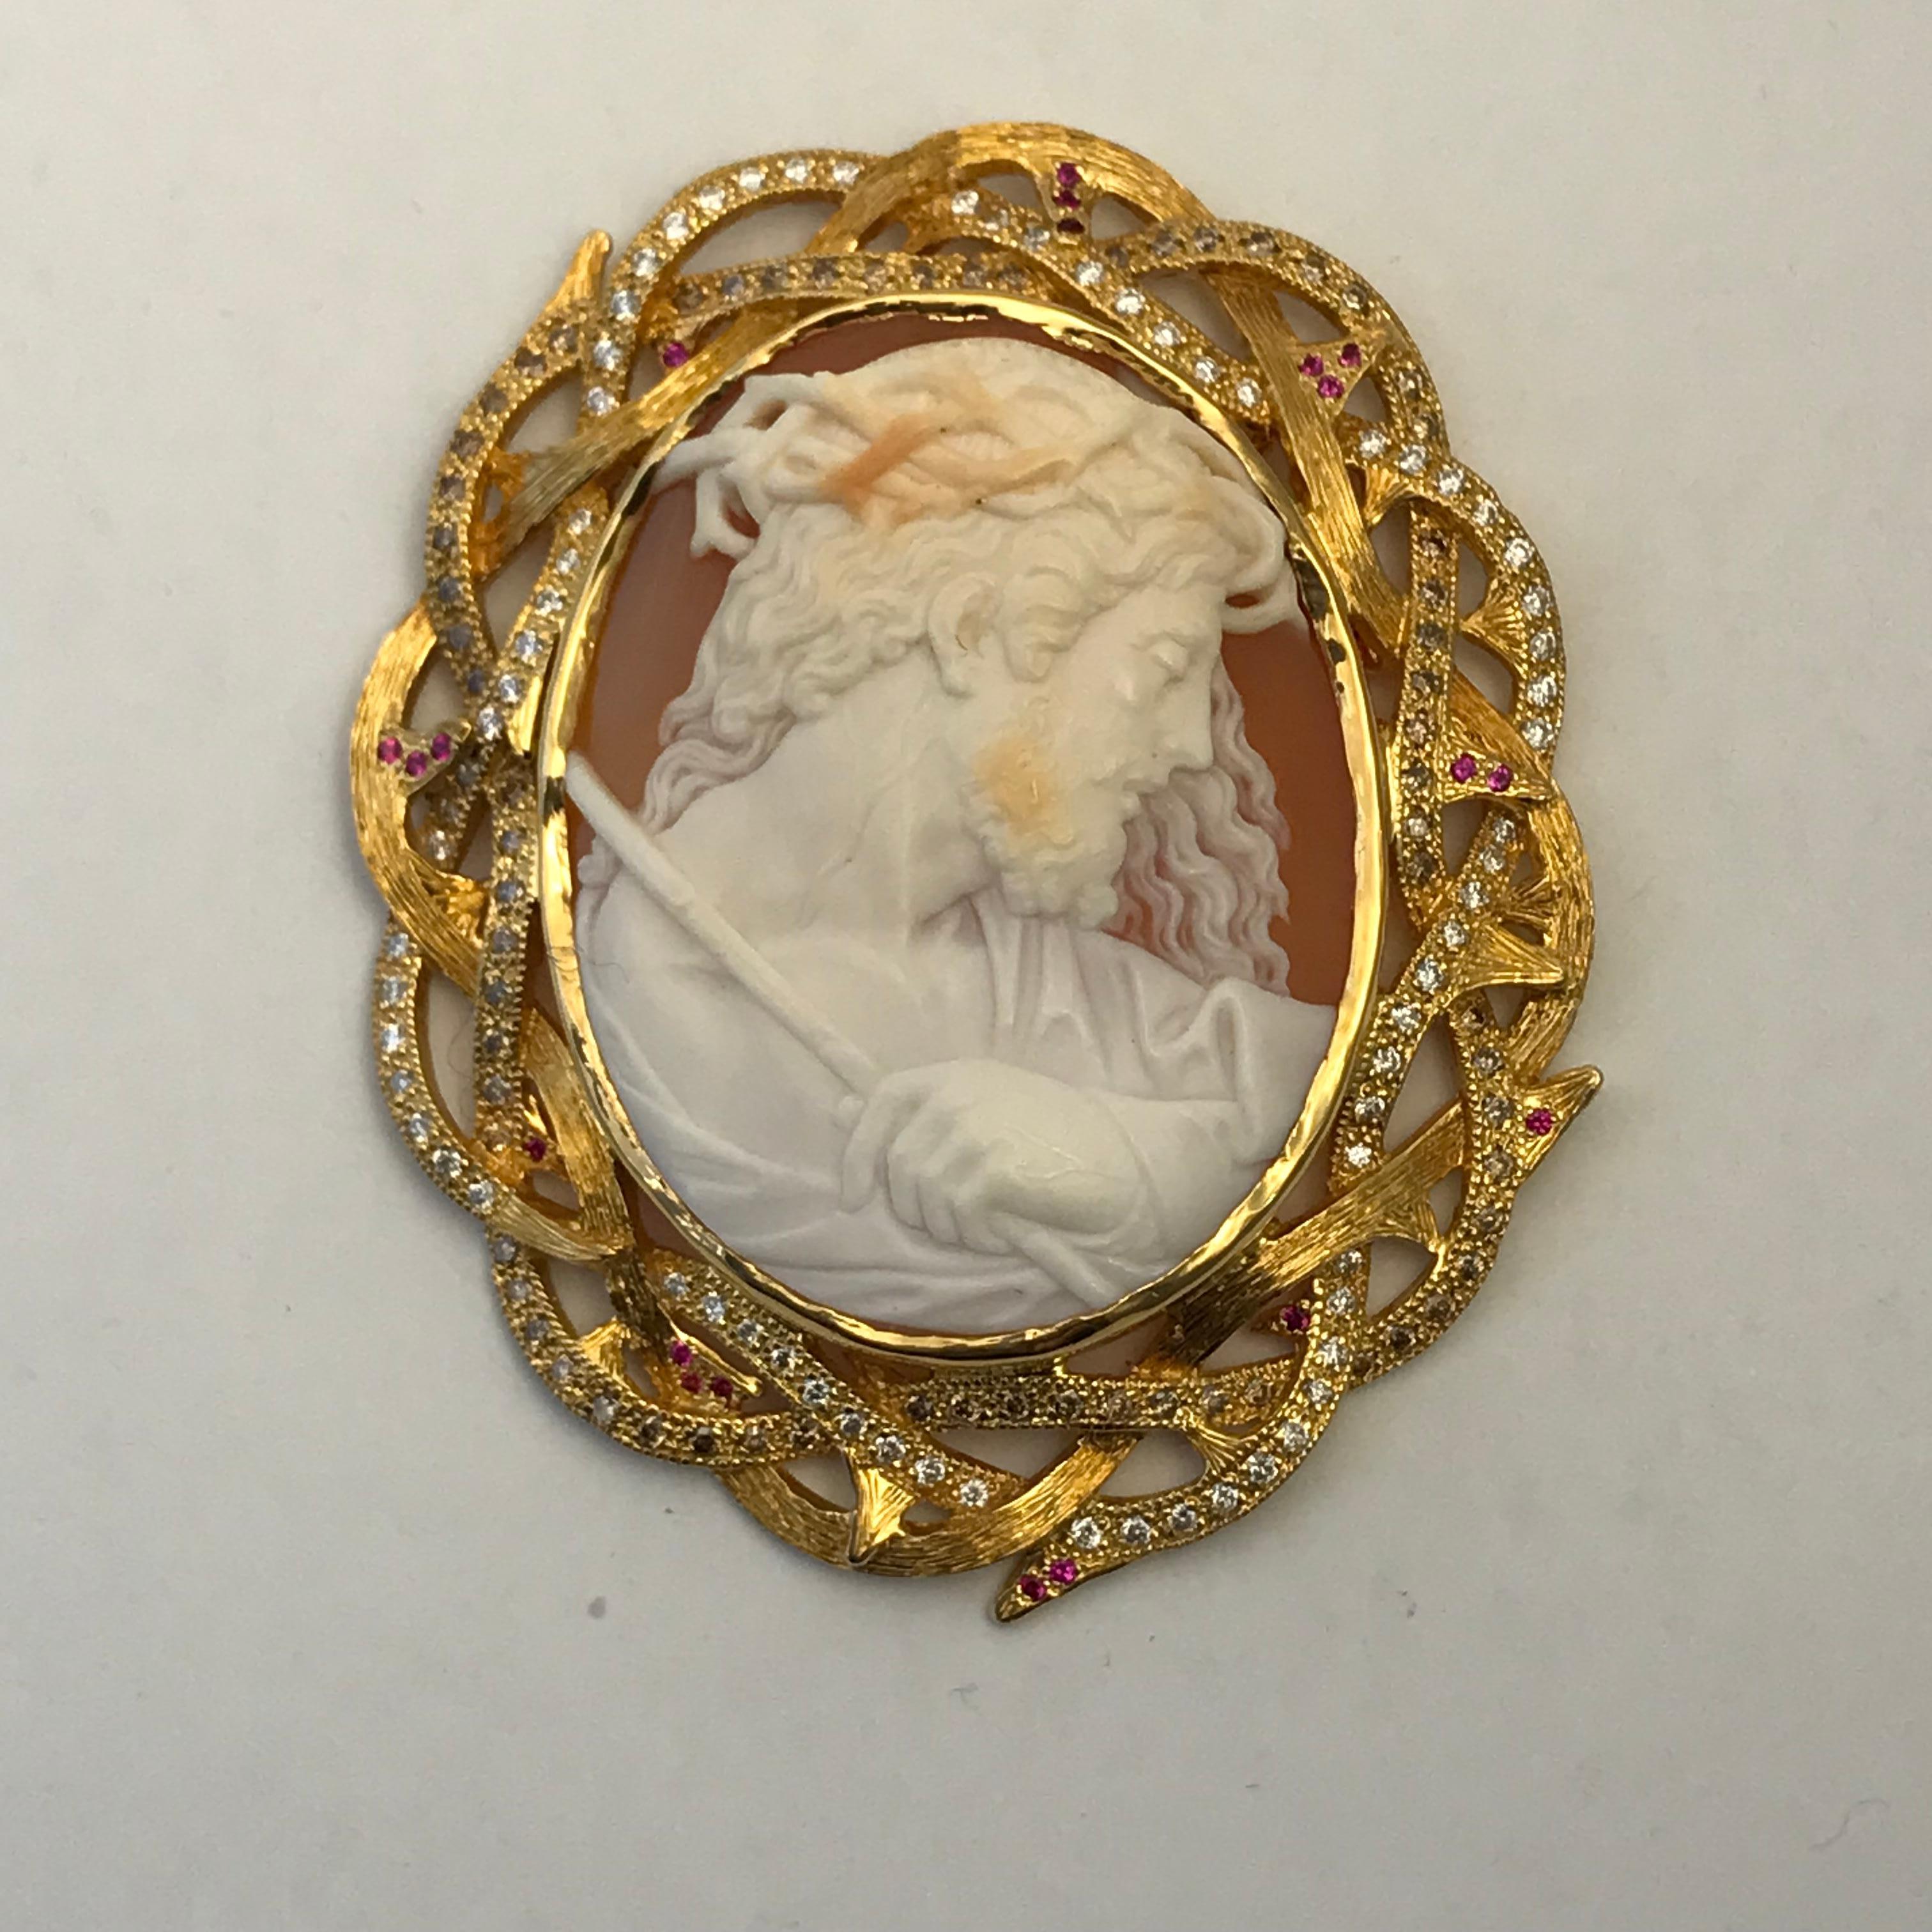 Round Cut Cameo 1890s Jesus Set in 14 Karat Gold with Diamonds, Rubies and Brown Diamonds For Sale